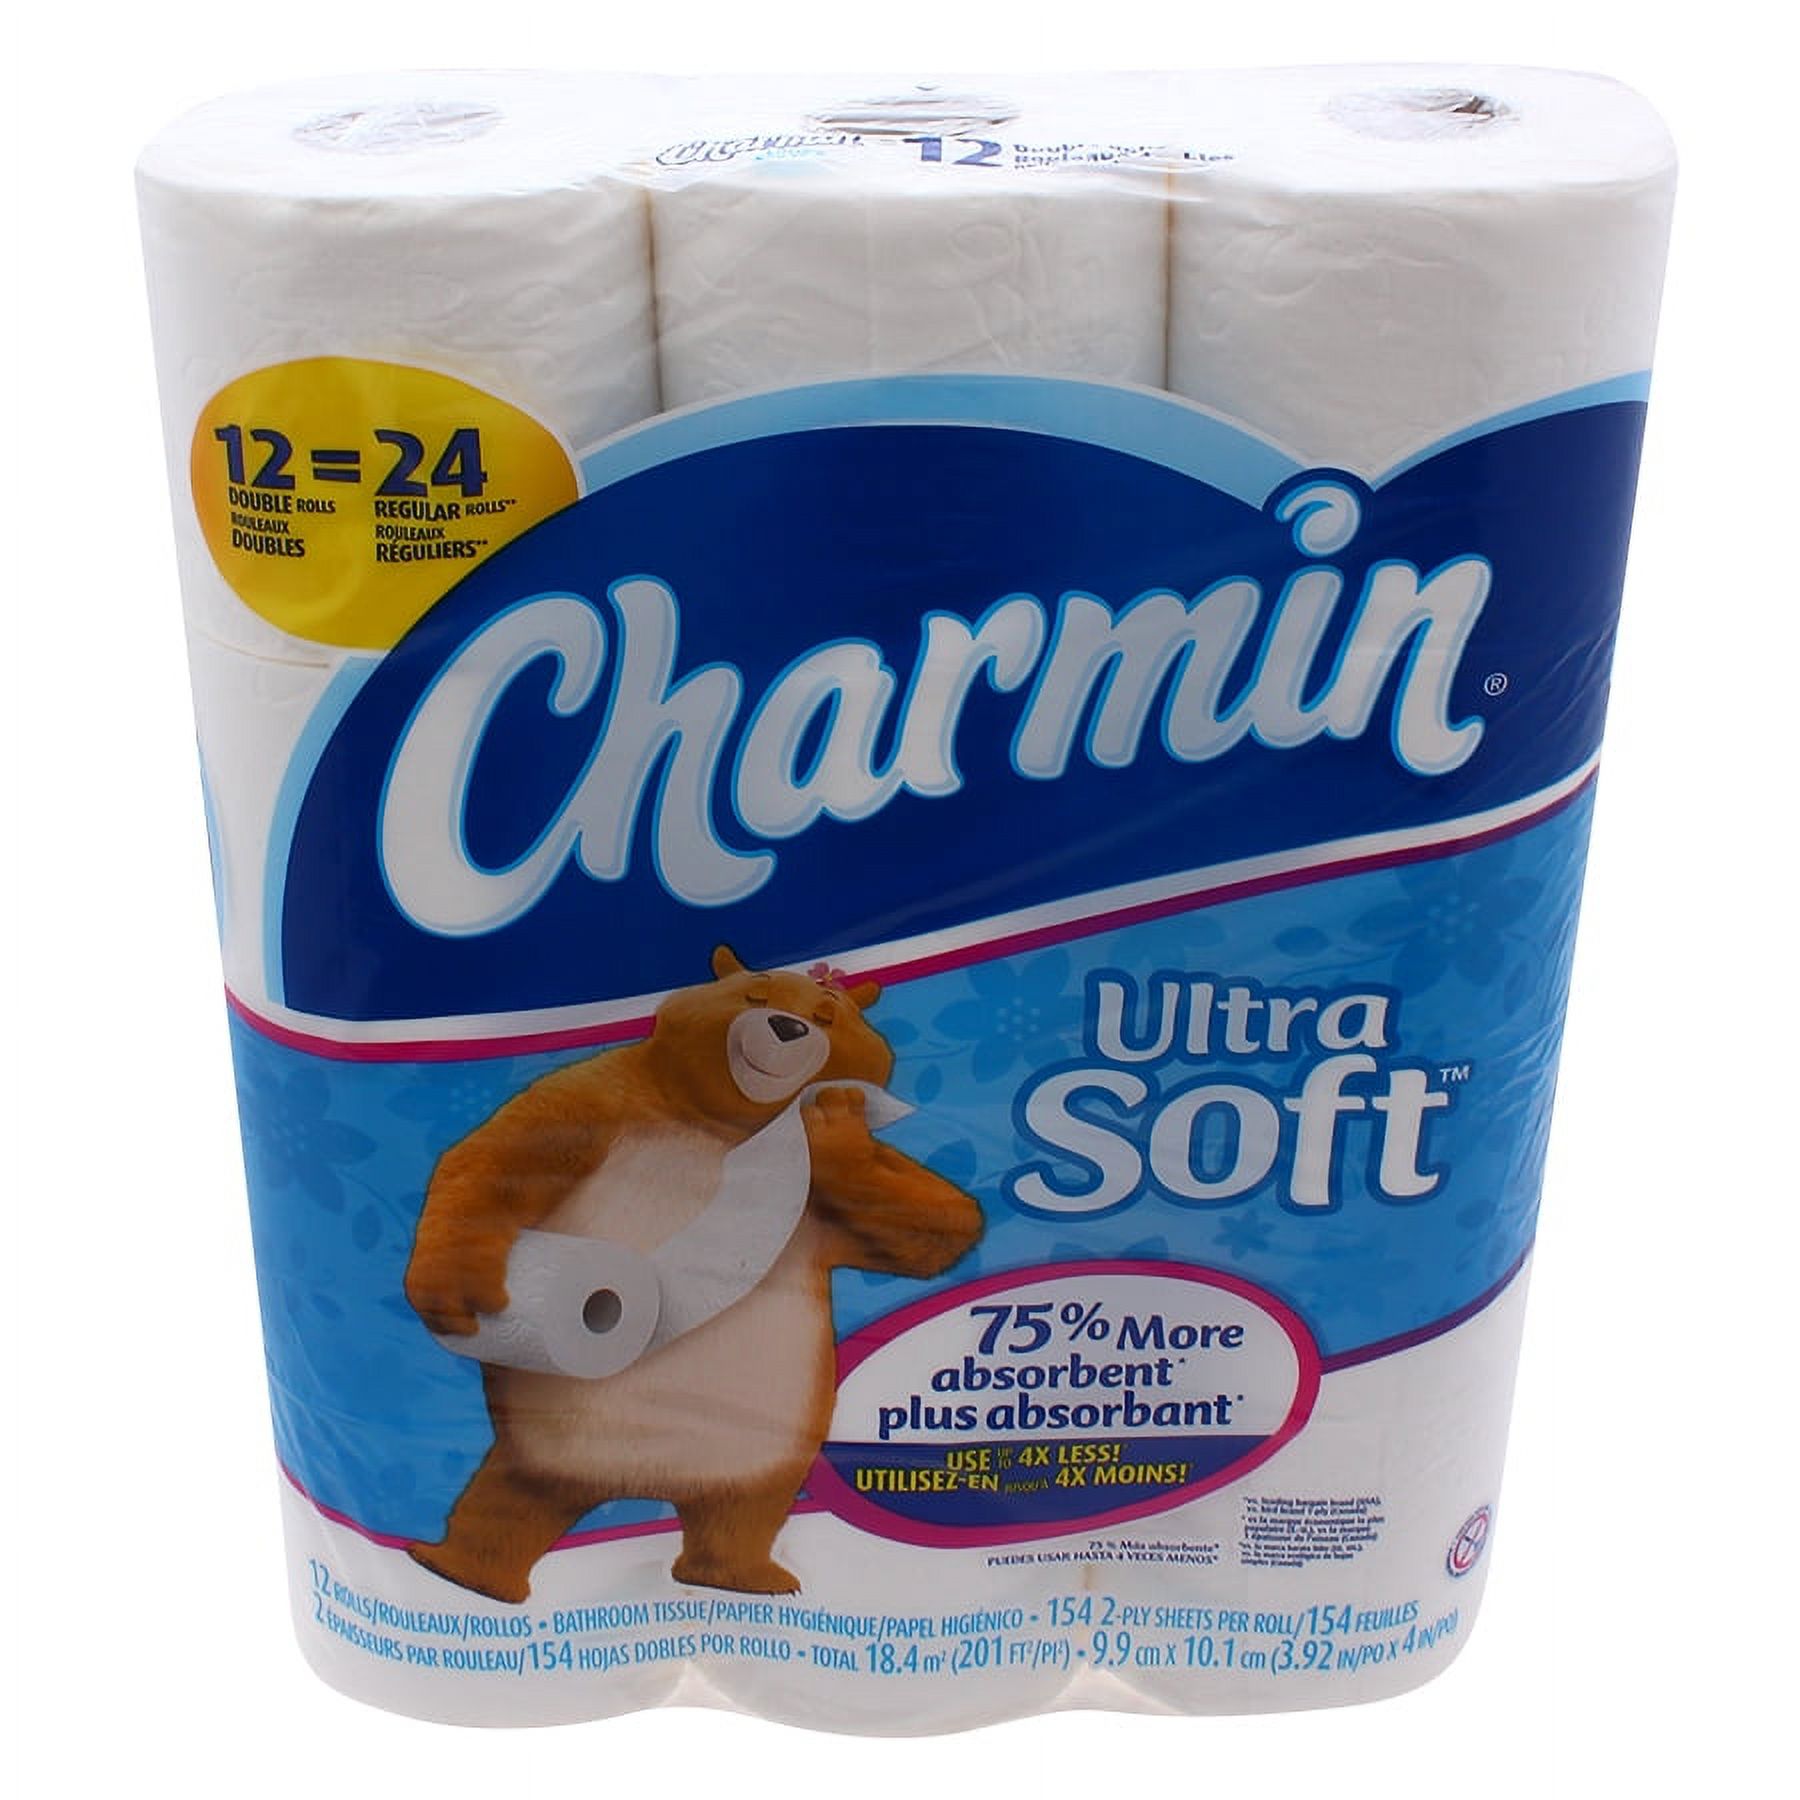 Charmin Ultra Soft Toilet Paper, 12 Double Rolls - image 4 of 4